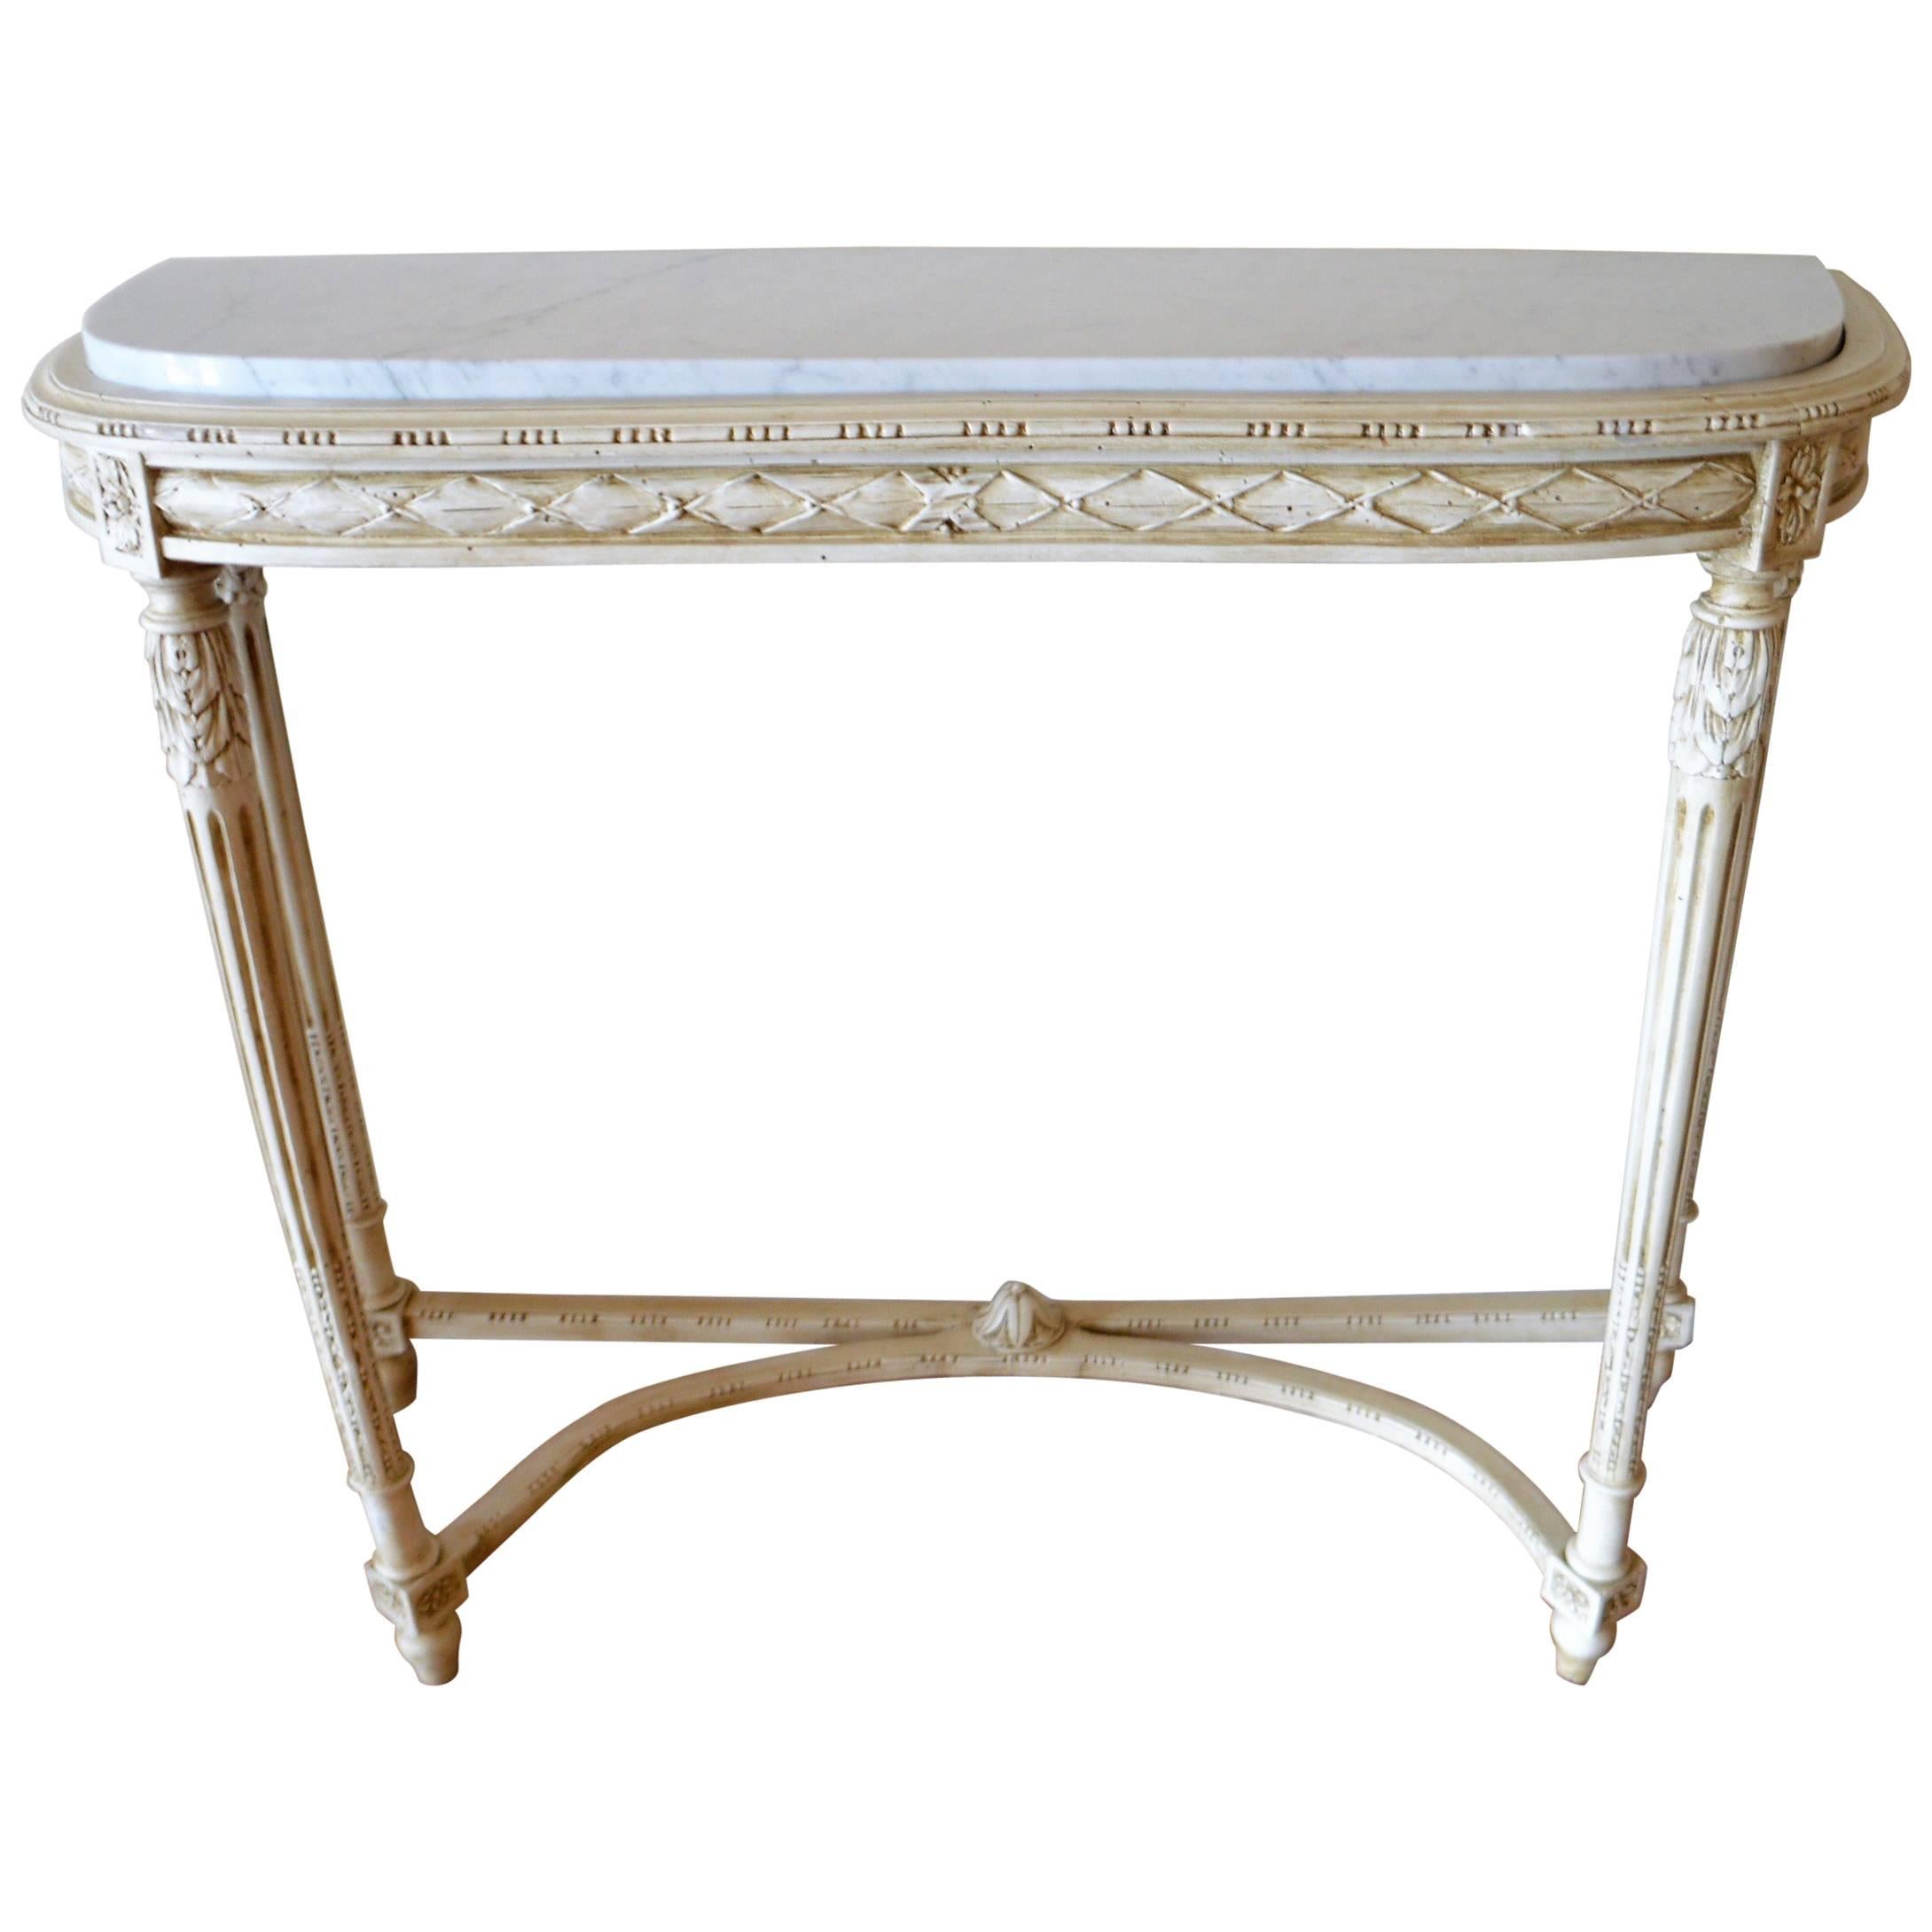 Louis XVI Style Painted Console Table with Carrara Marble Top